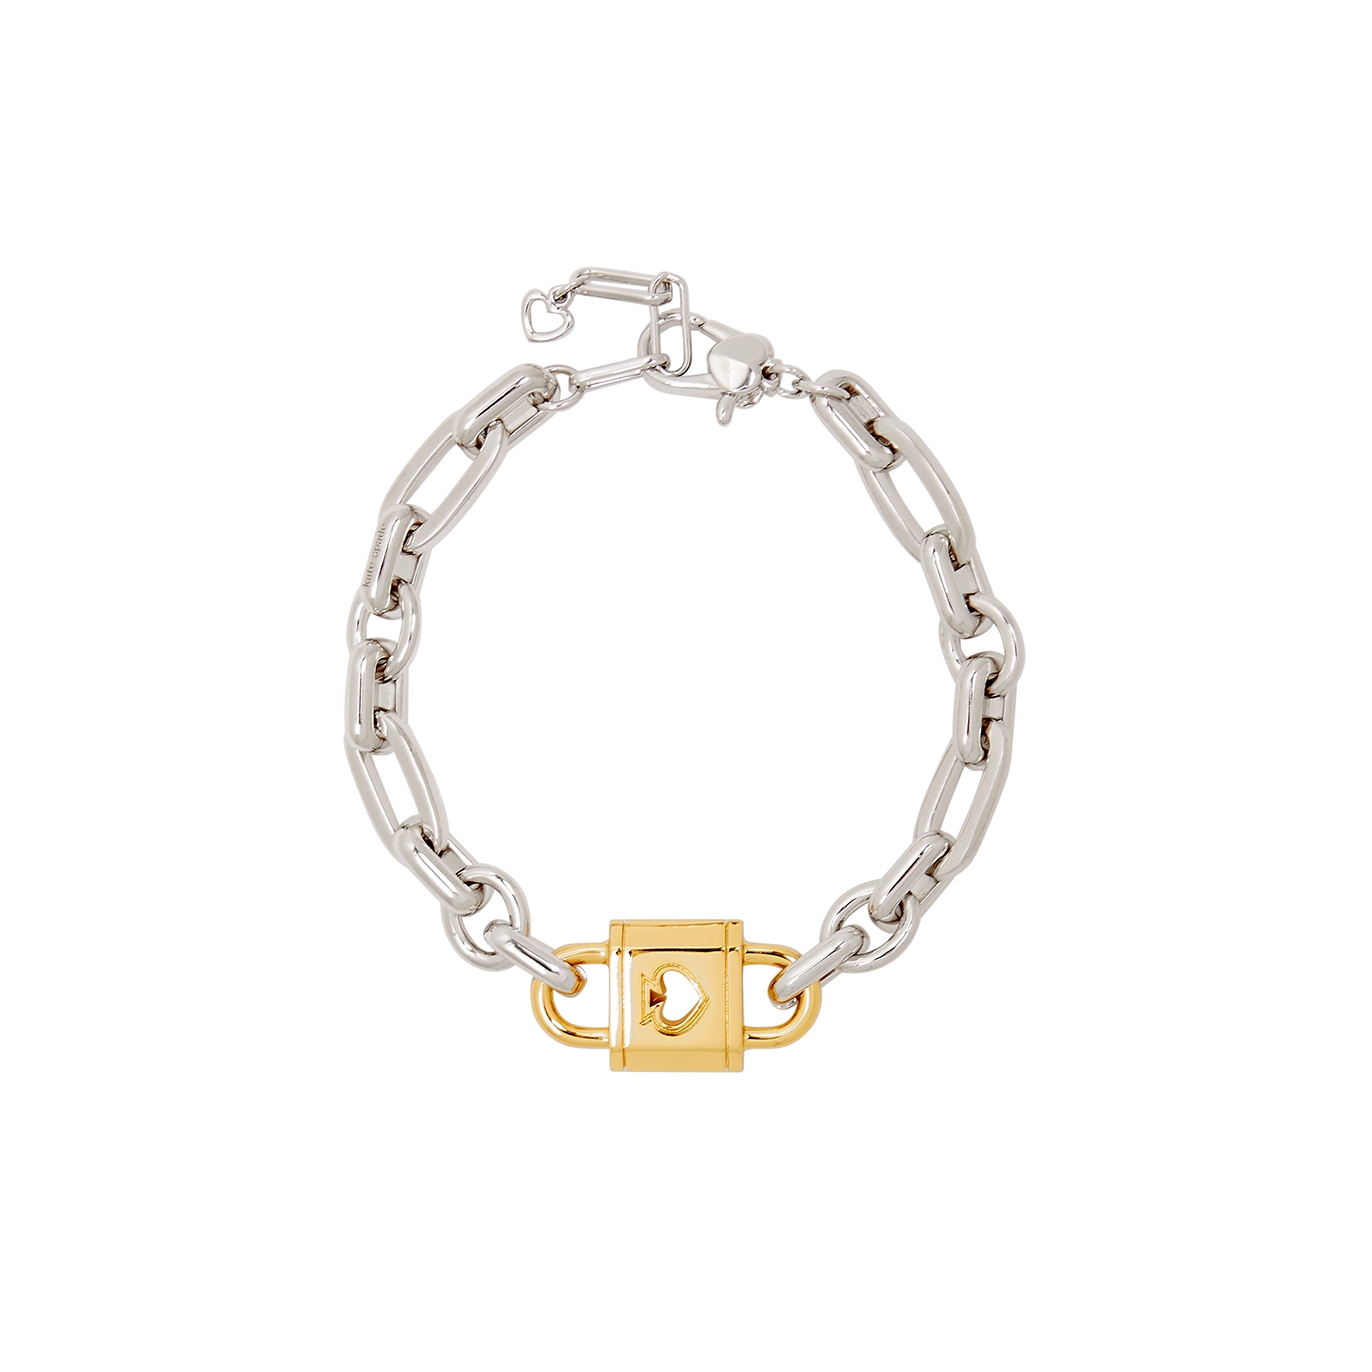 Kate Spade New York Lock And Spade Two-tone Chain Bracelet - Gold - One Size